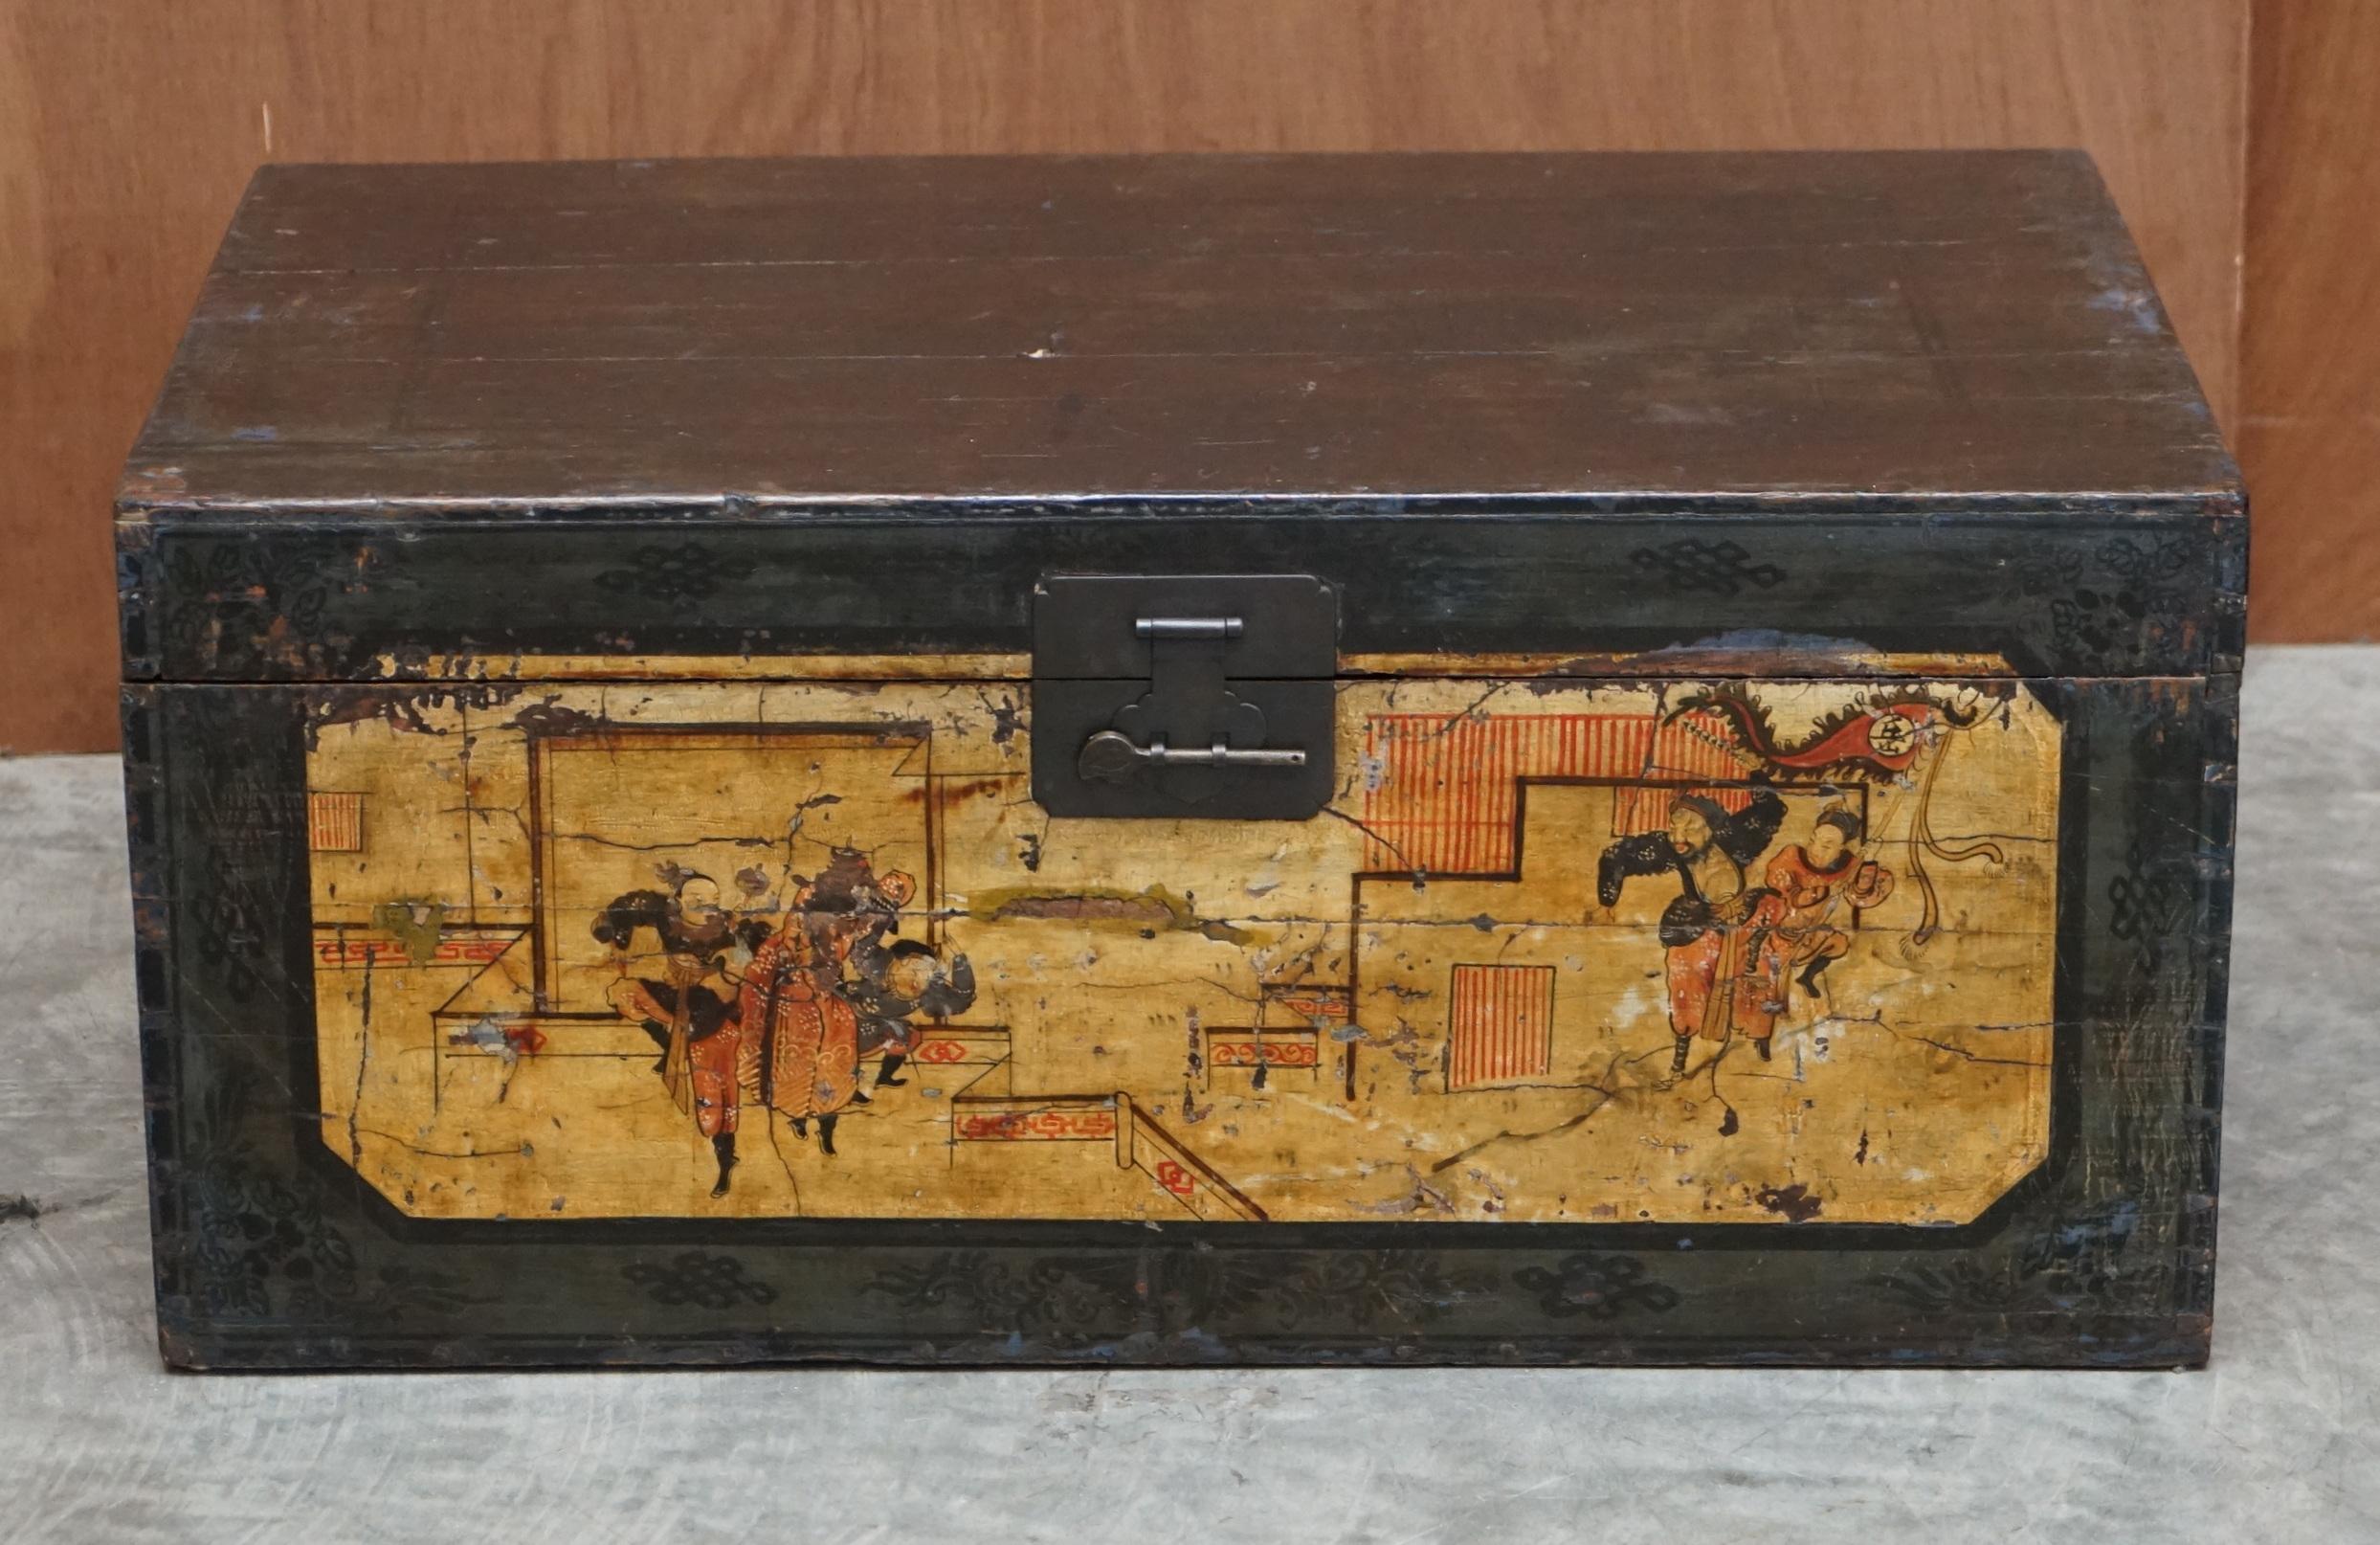 We are delighted to offer this stunning oriental hand painted trunk or chest with painting depicting immortals amongst buildings

A very finely decorated piece, it’s a nice size and could be used as a coffee table or for linen storage

We have